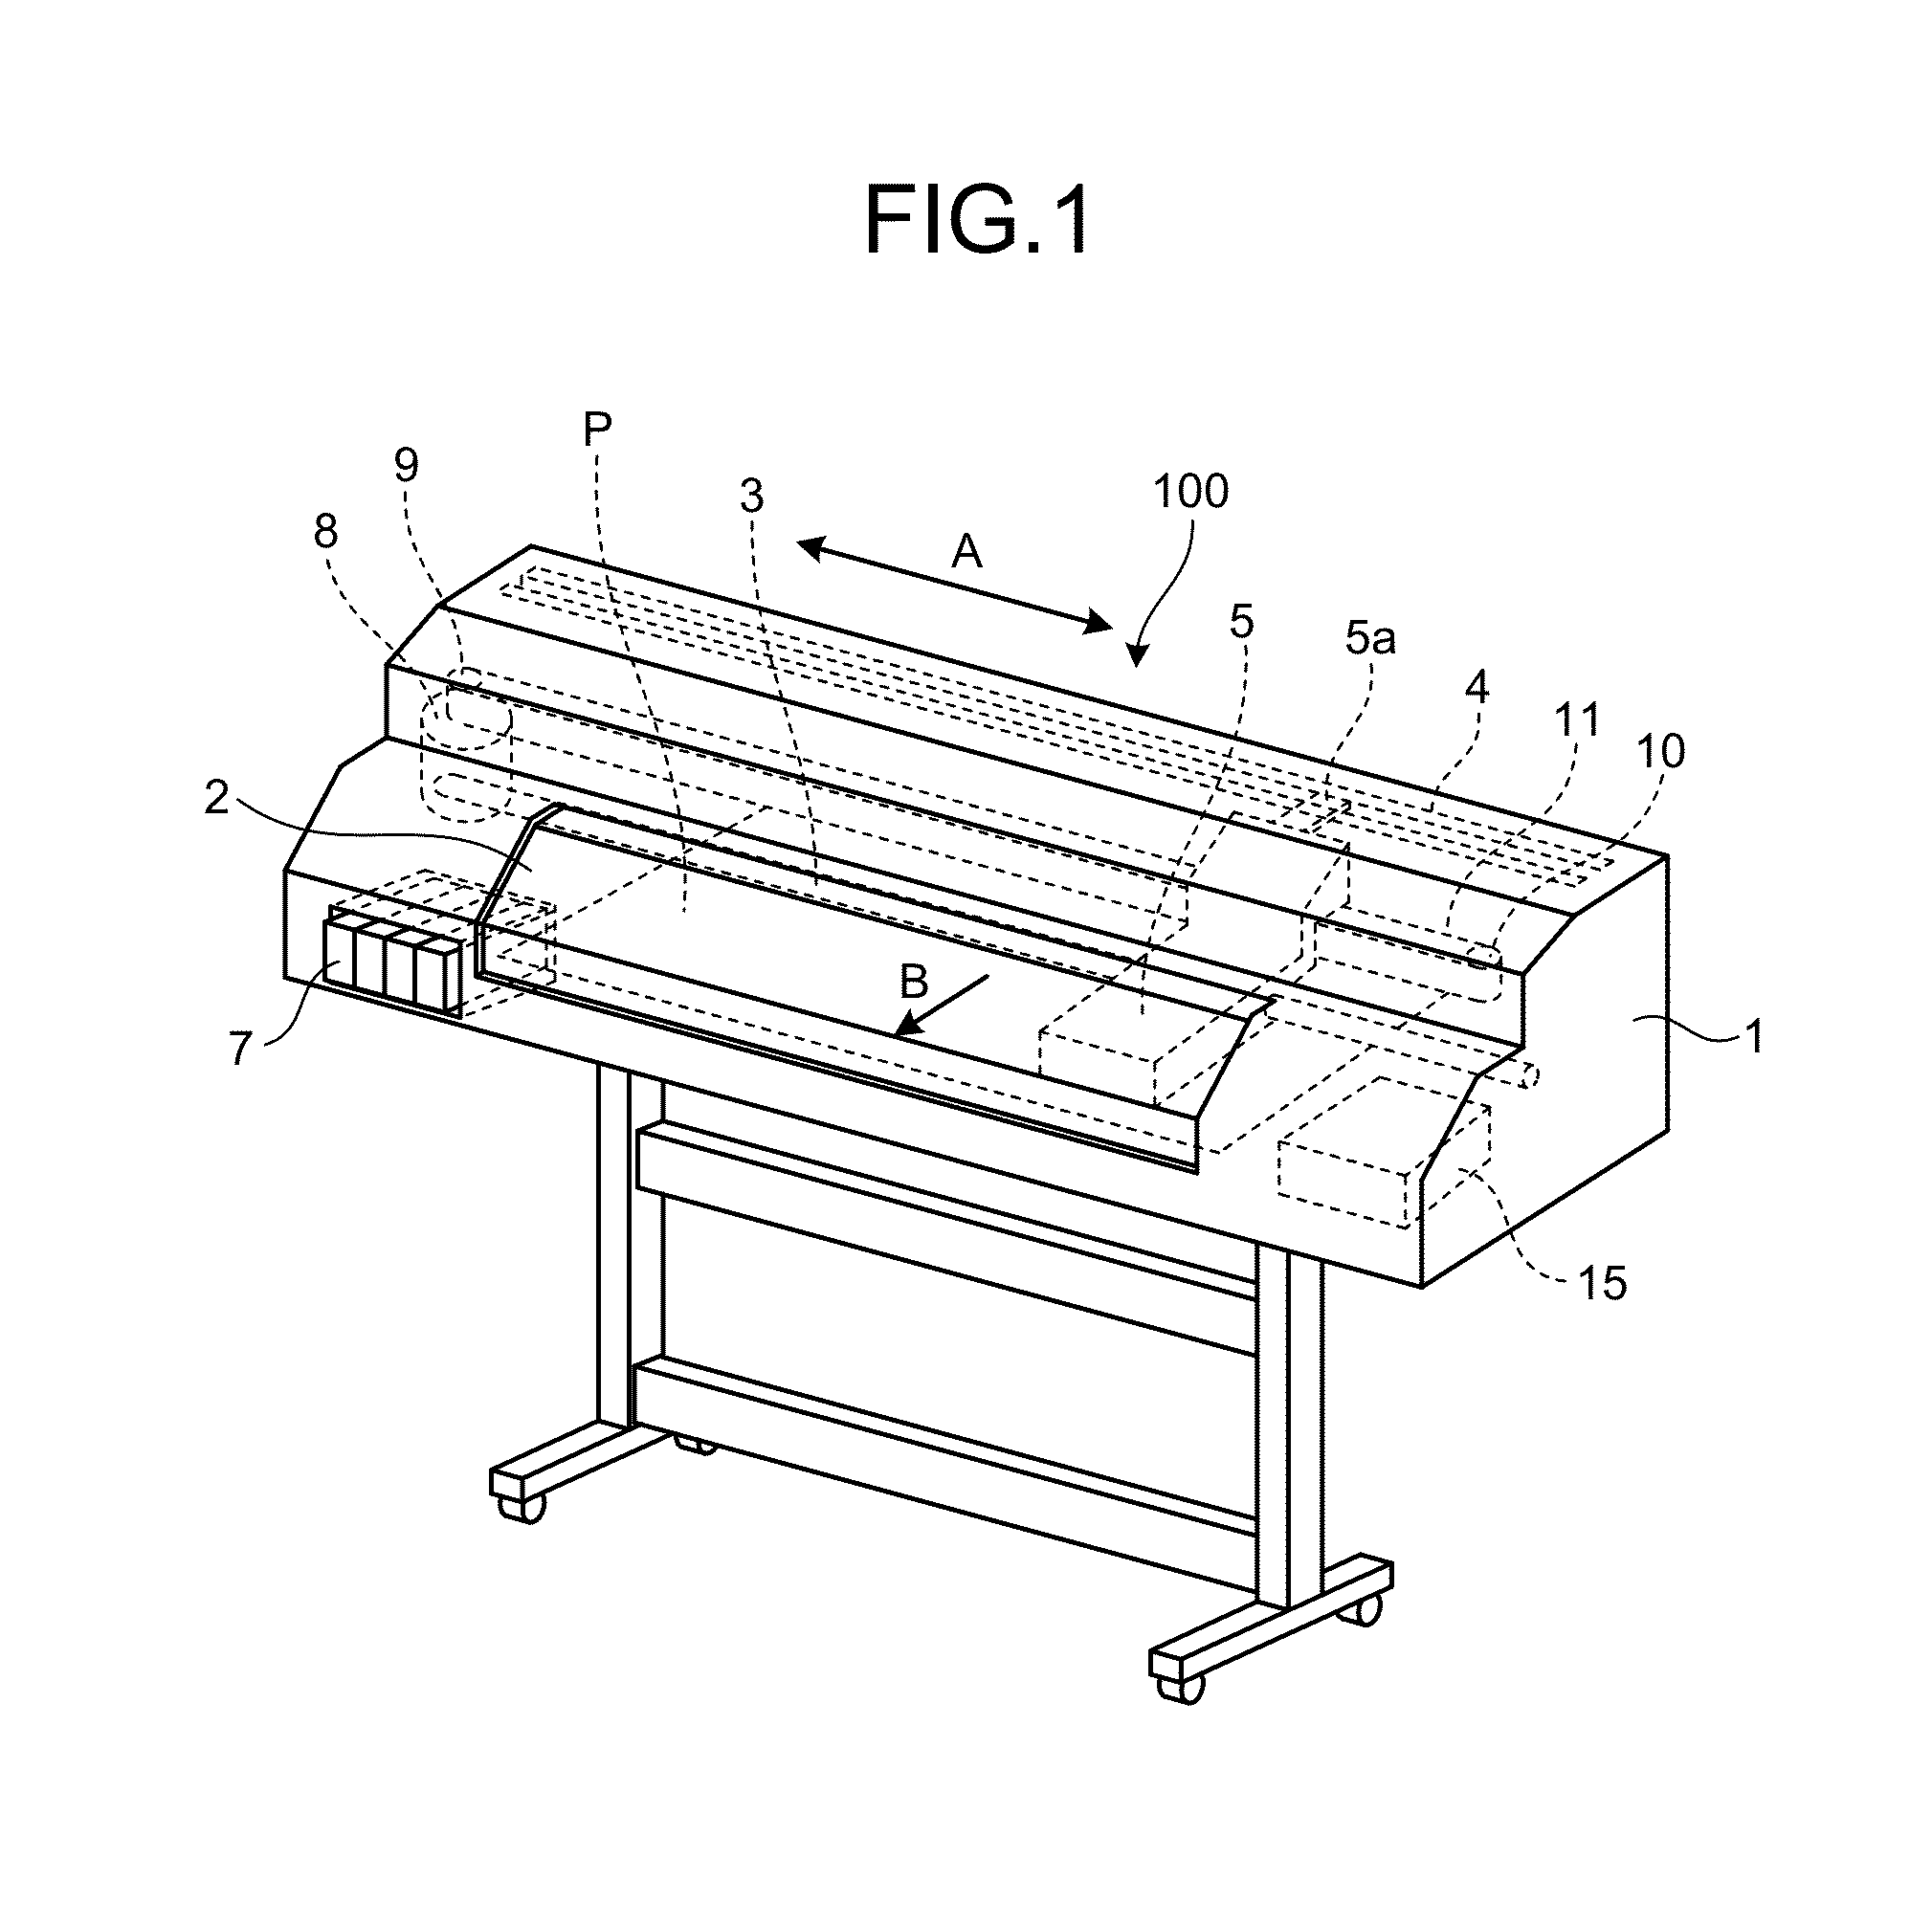 Image forming apparatus, calibration method, and drying determination method